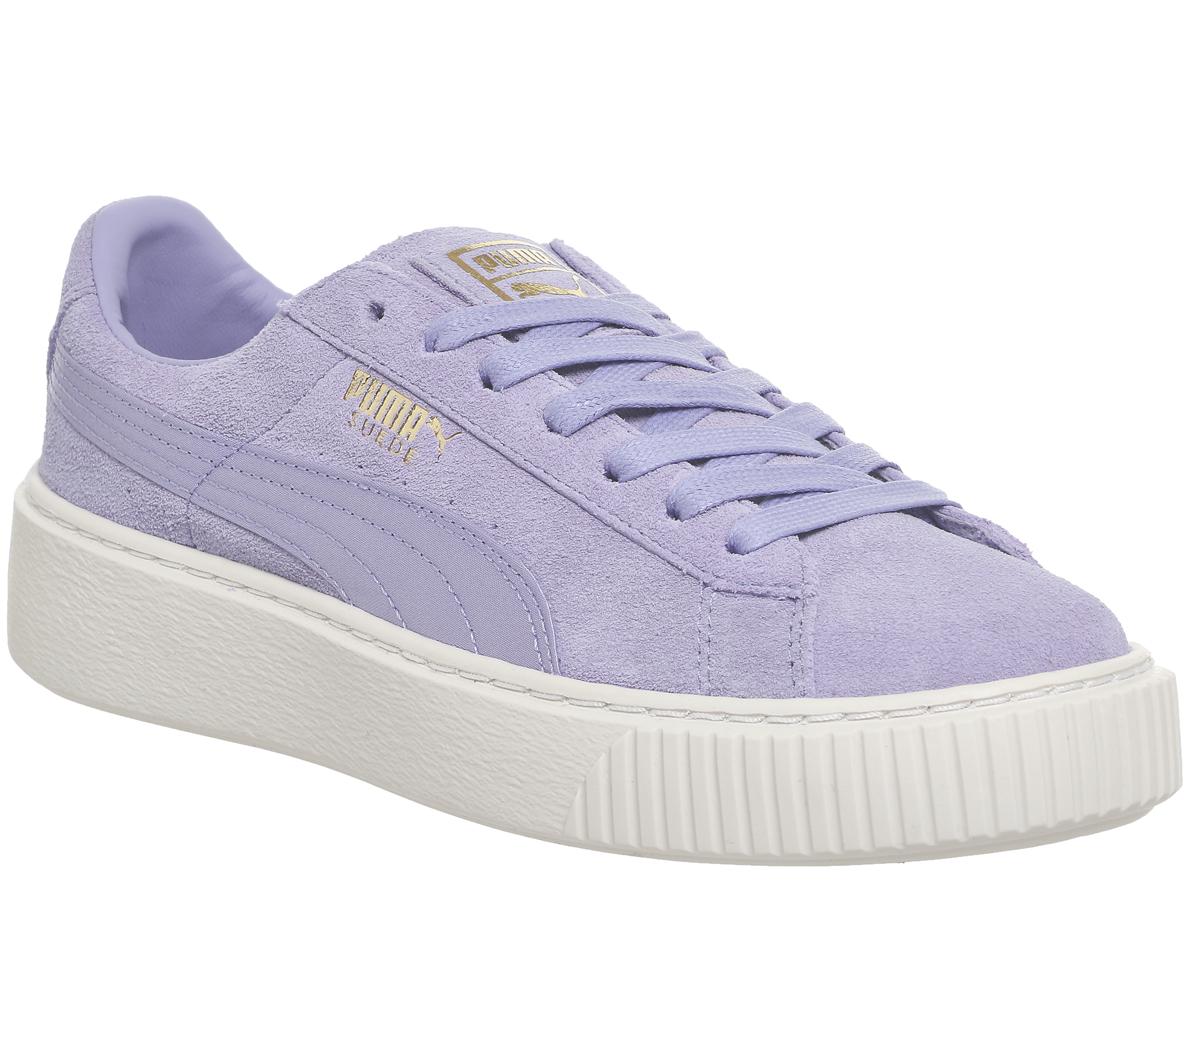 Puma Suede Platform Trainers Lavender Gold Satin - Hers trainers